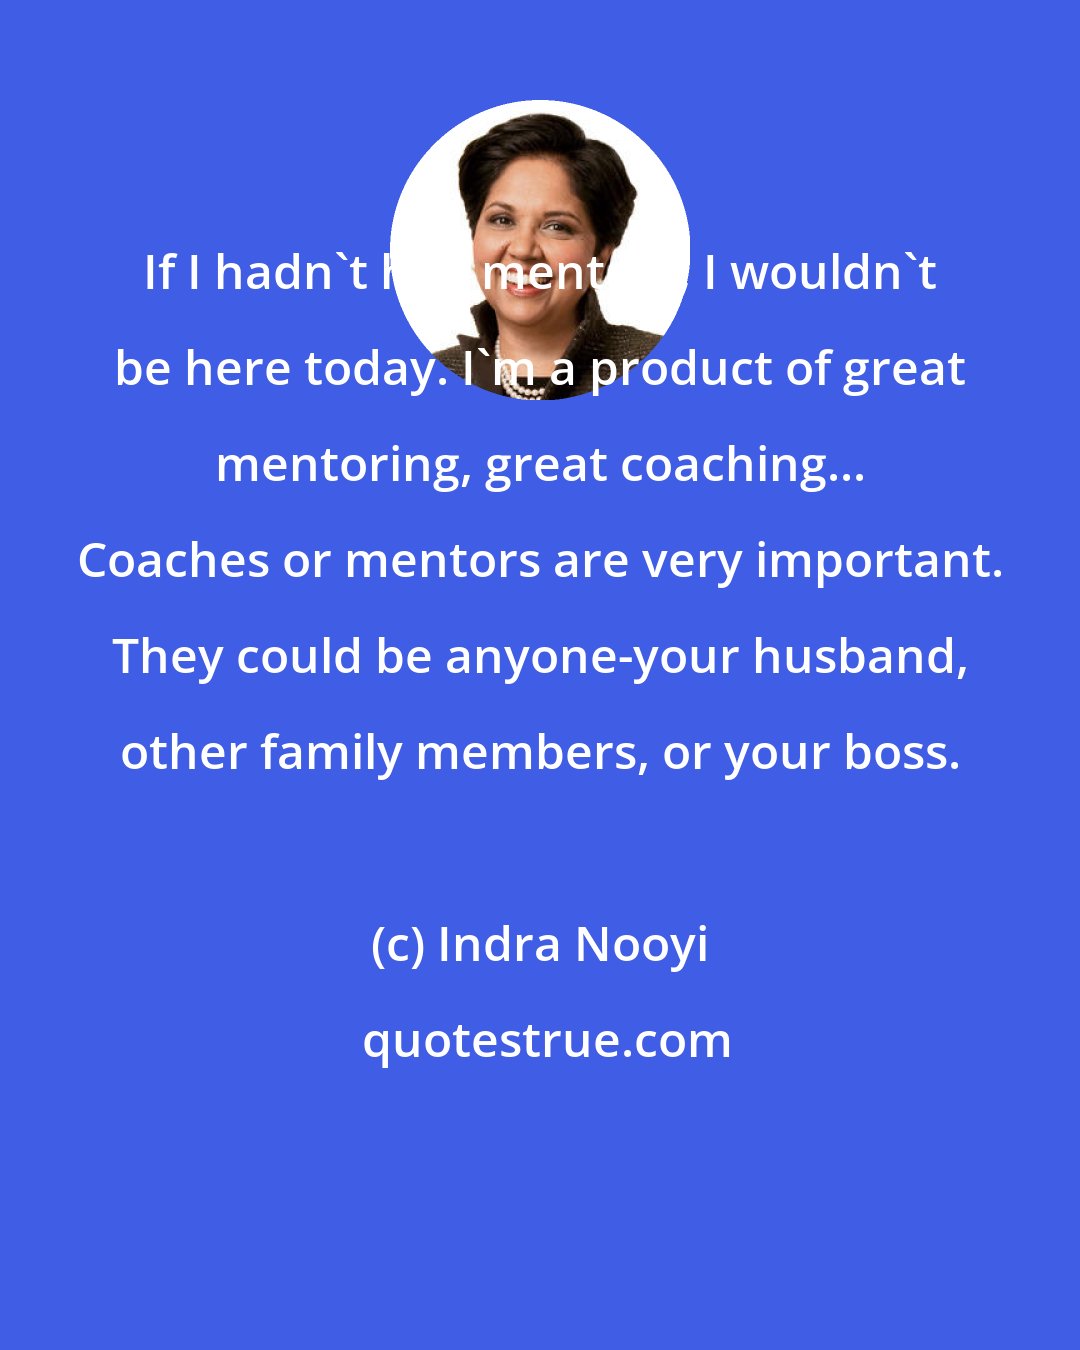 Indra Nooyi: If I hadn't had mentors, I wouldn't be here today. I'm a product of great mentoring, great coaching... Coaches or mentors are very important. They could be anyone-your husband, other family members, or your boss.